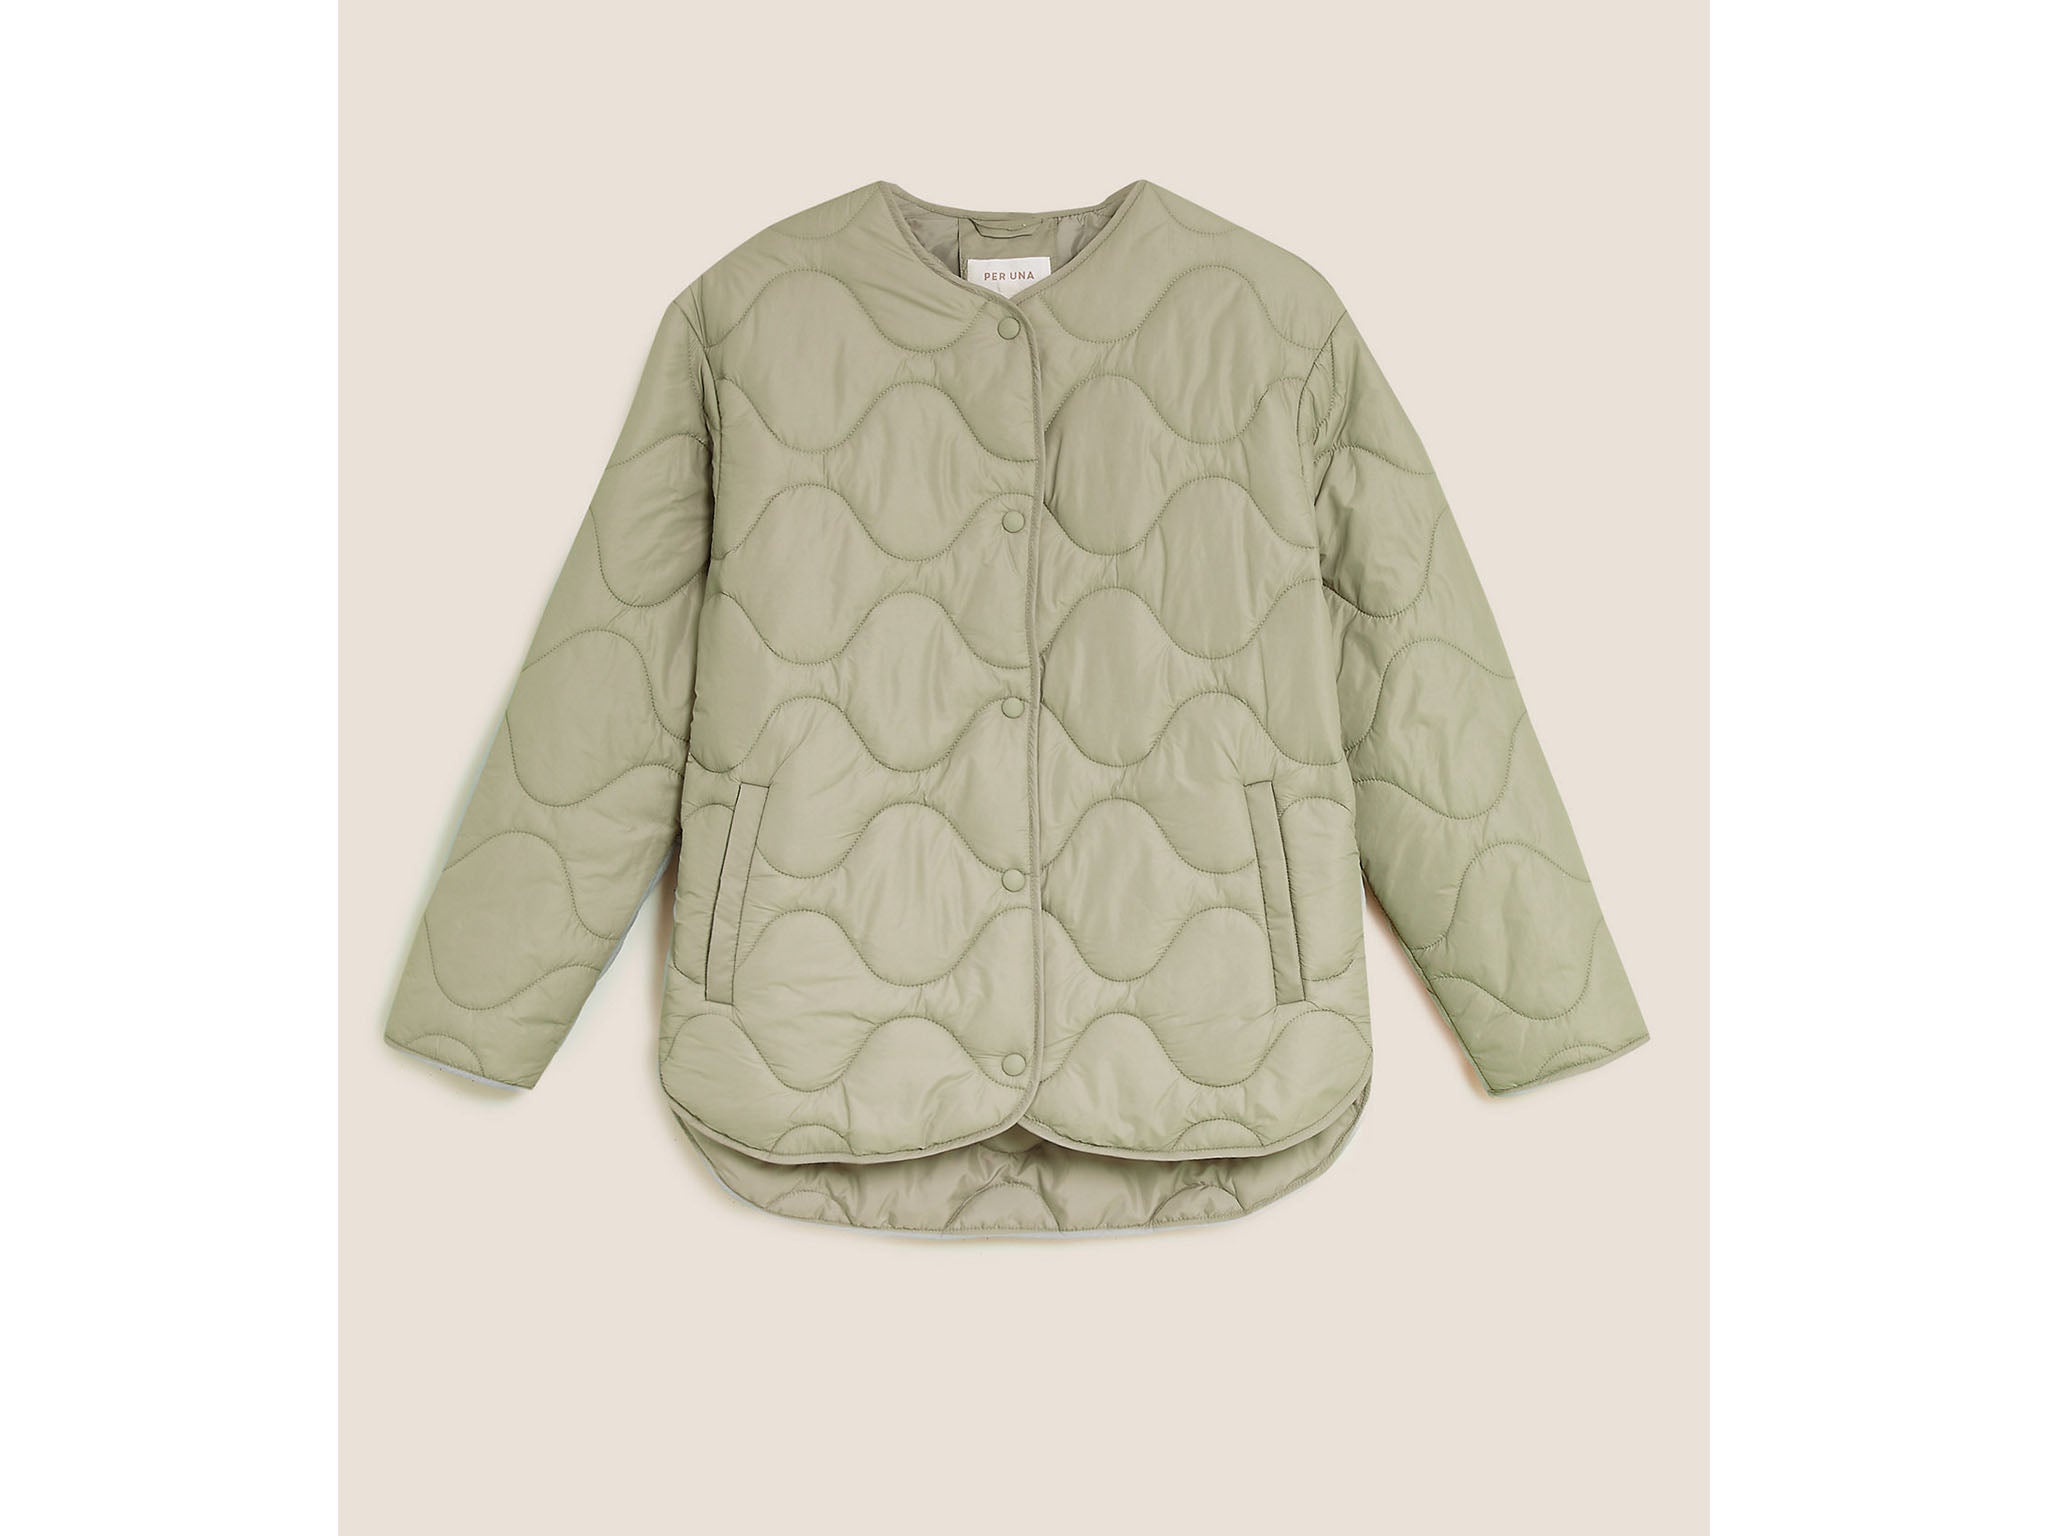 The Frankie Shop's quilted jacket is back in stock: High street